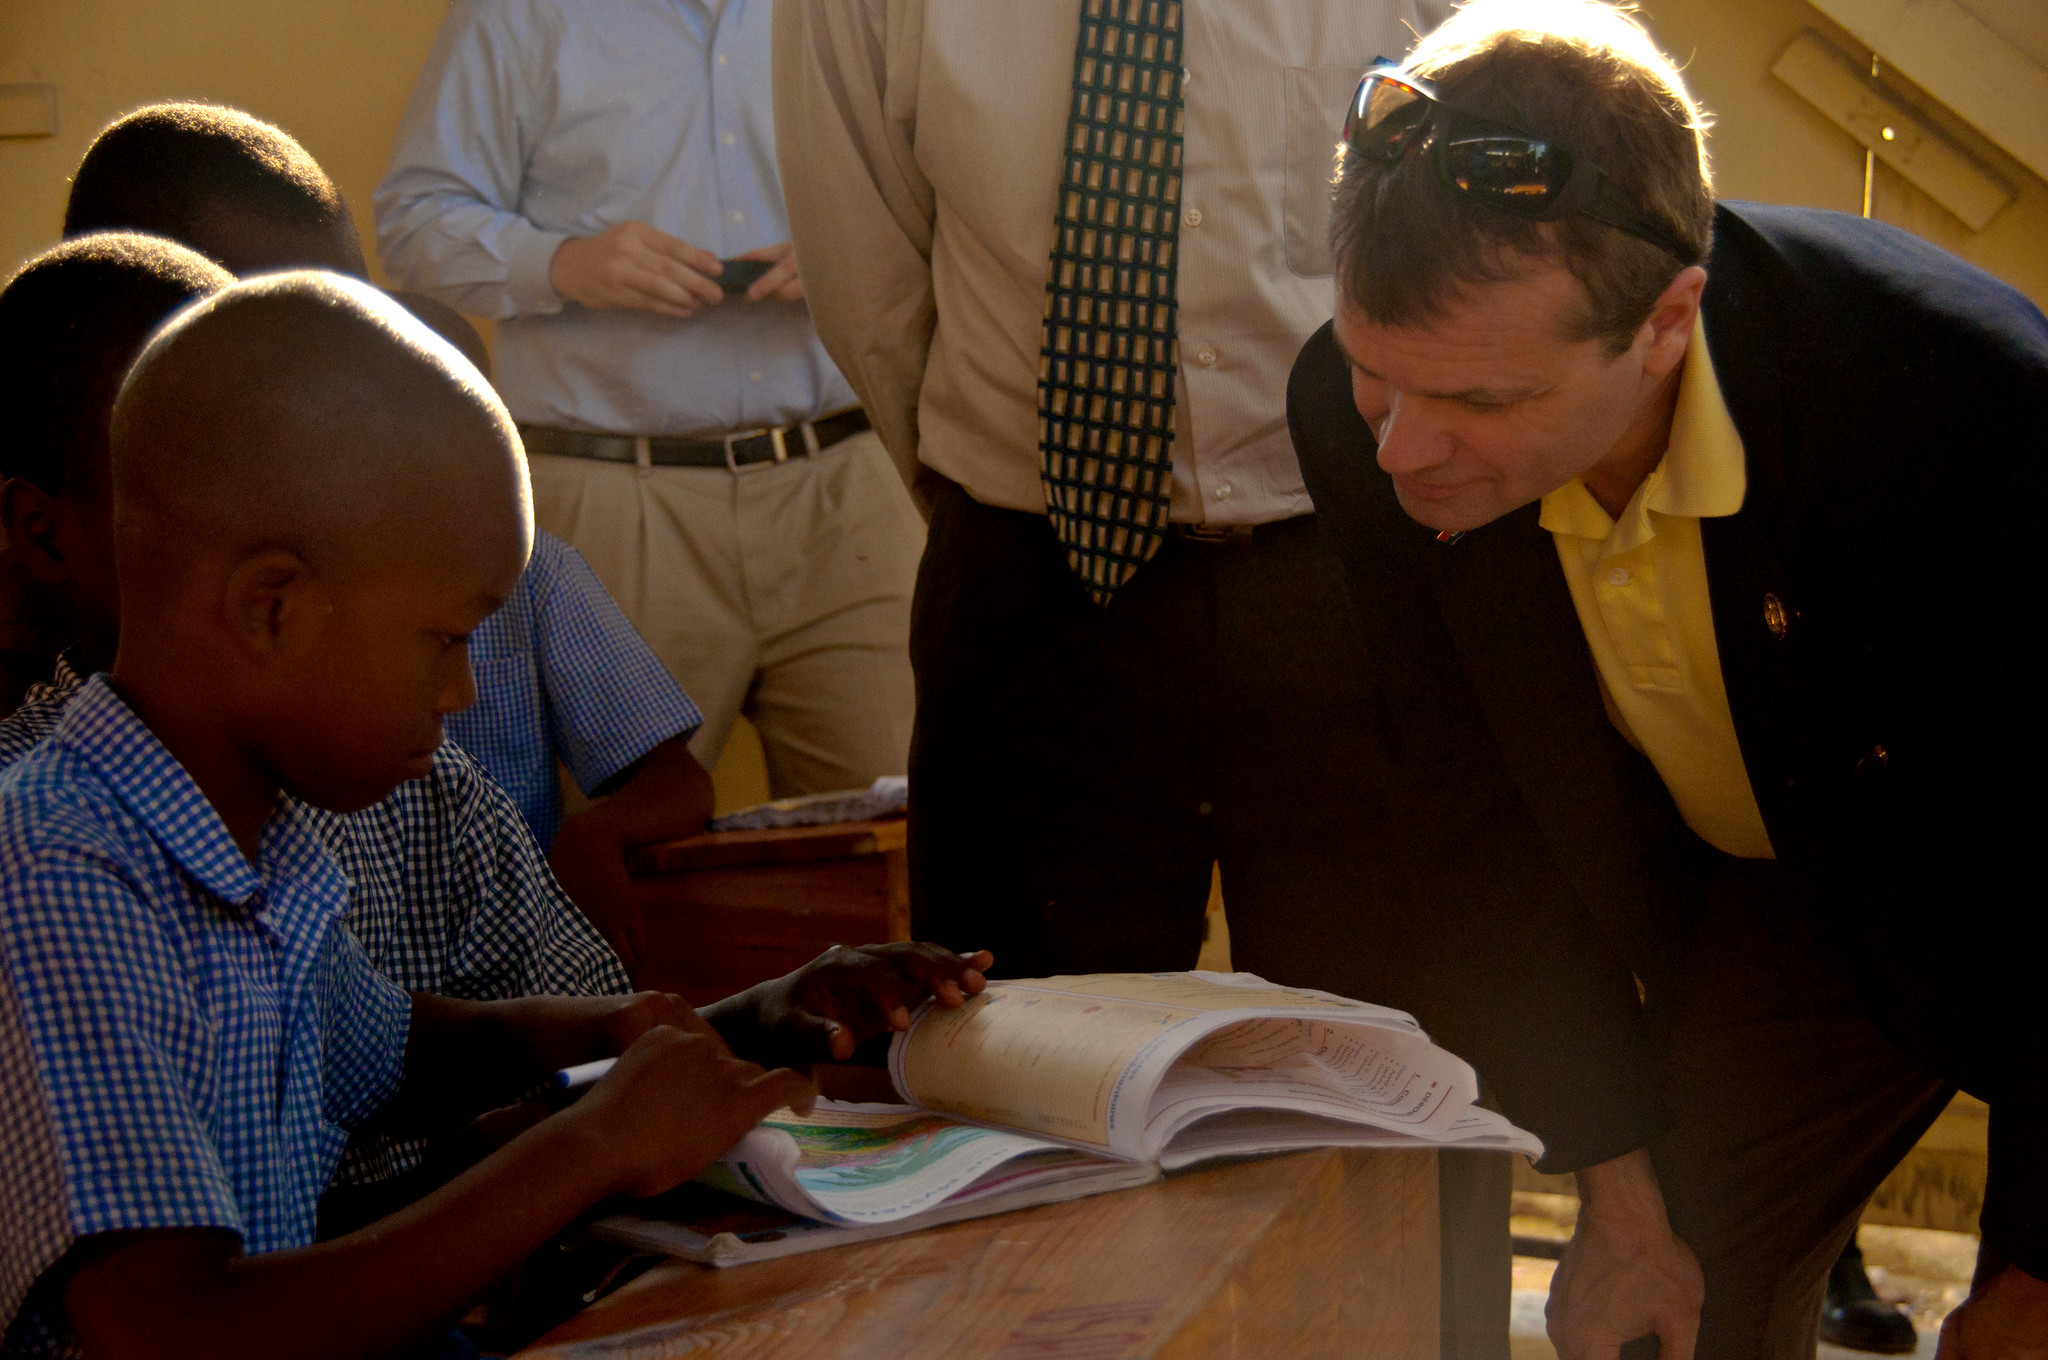 USAID worker in suit speaking to an African child reading a book.